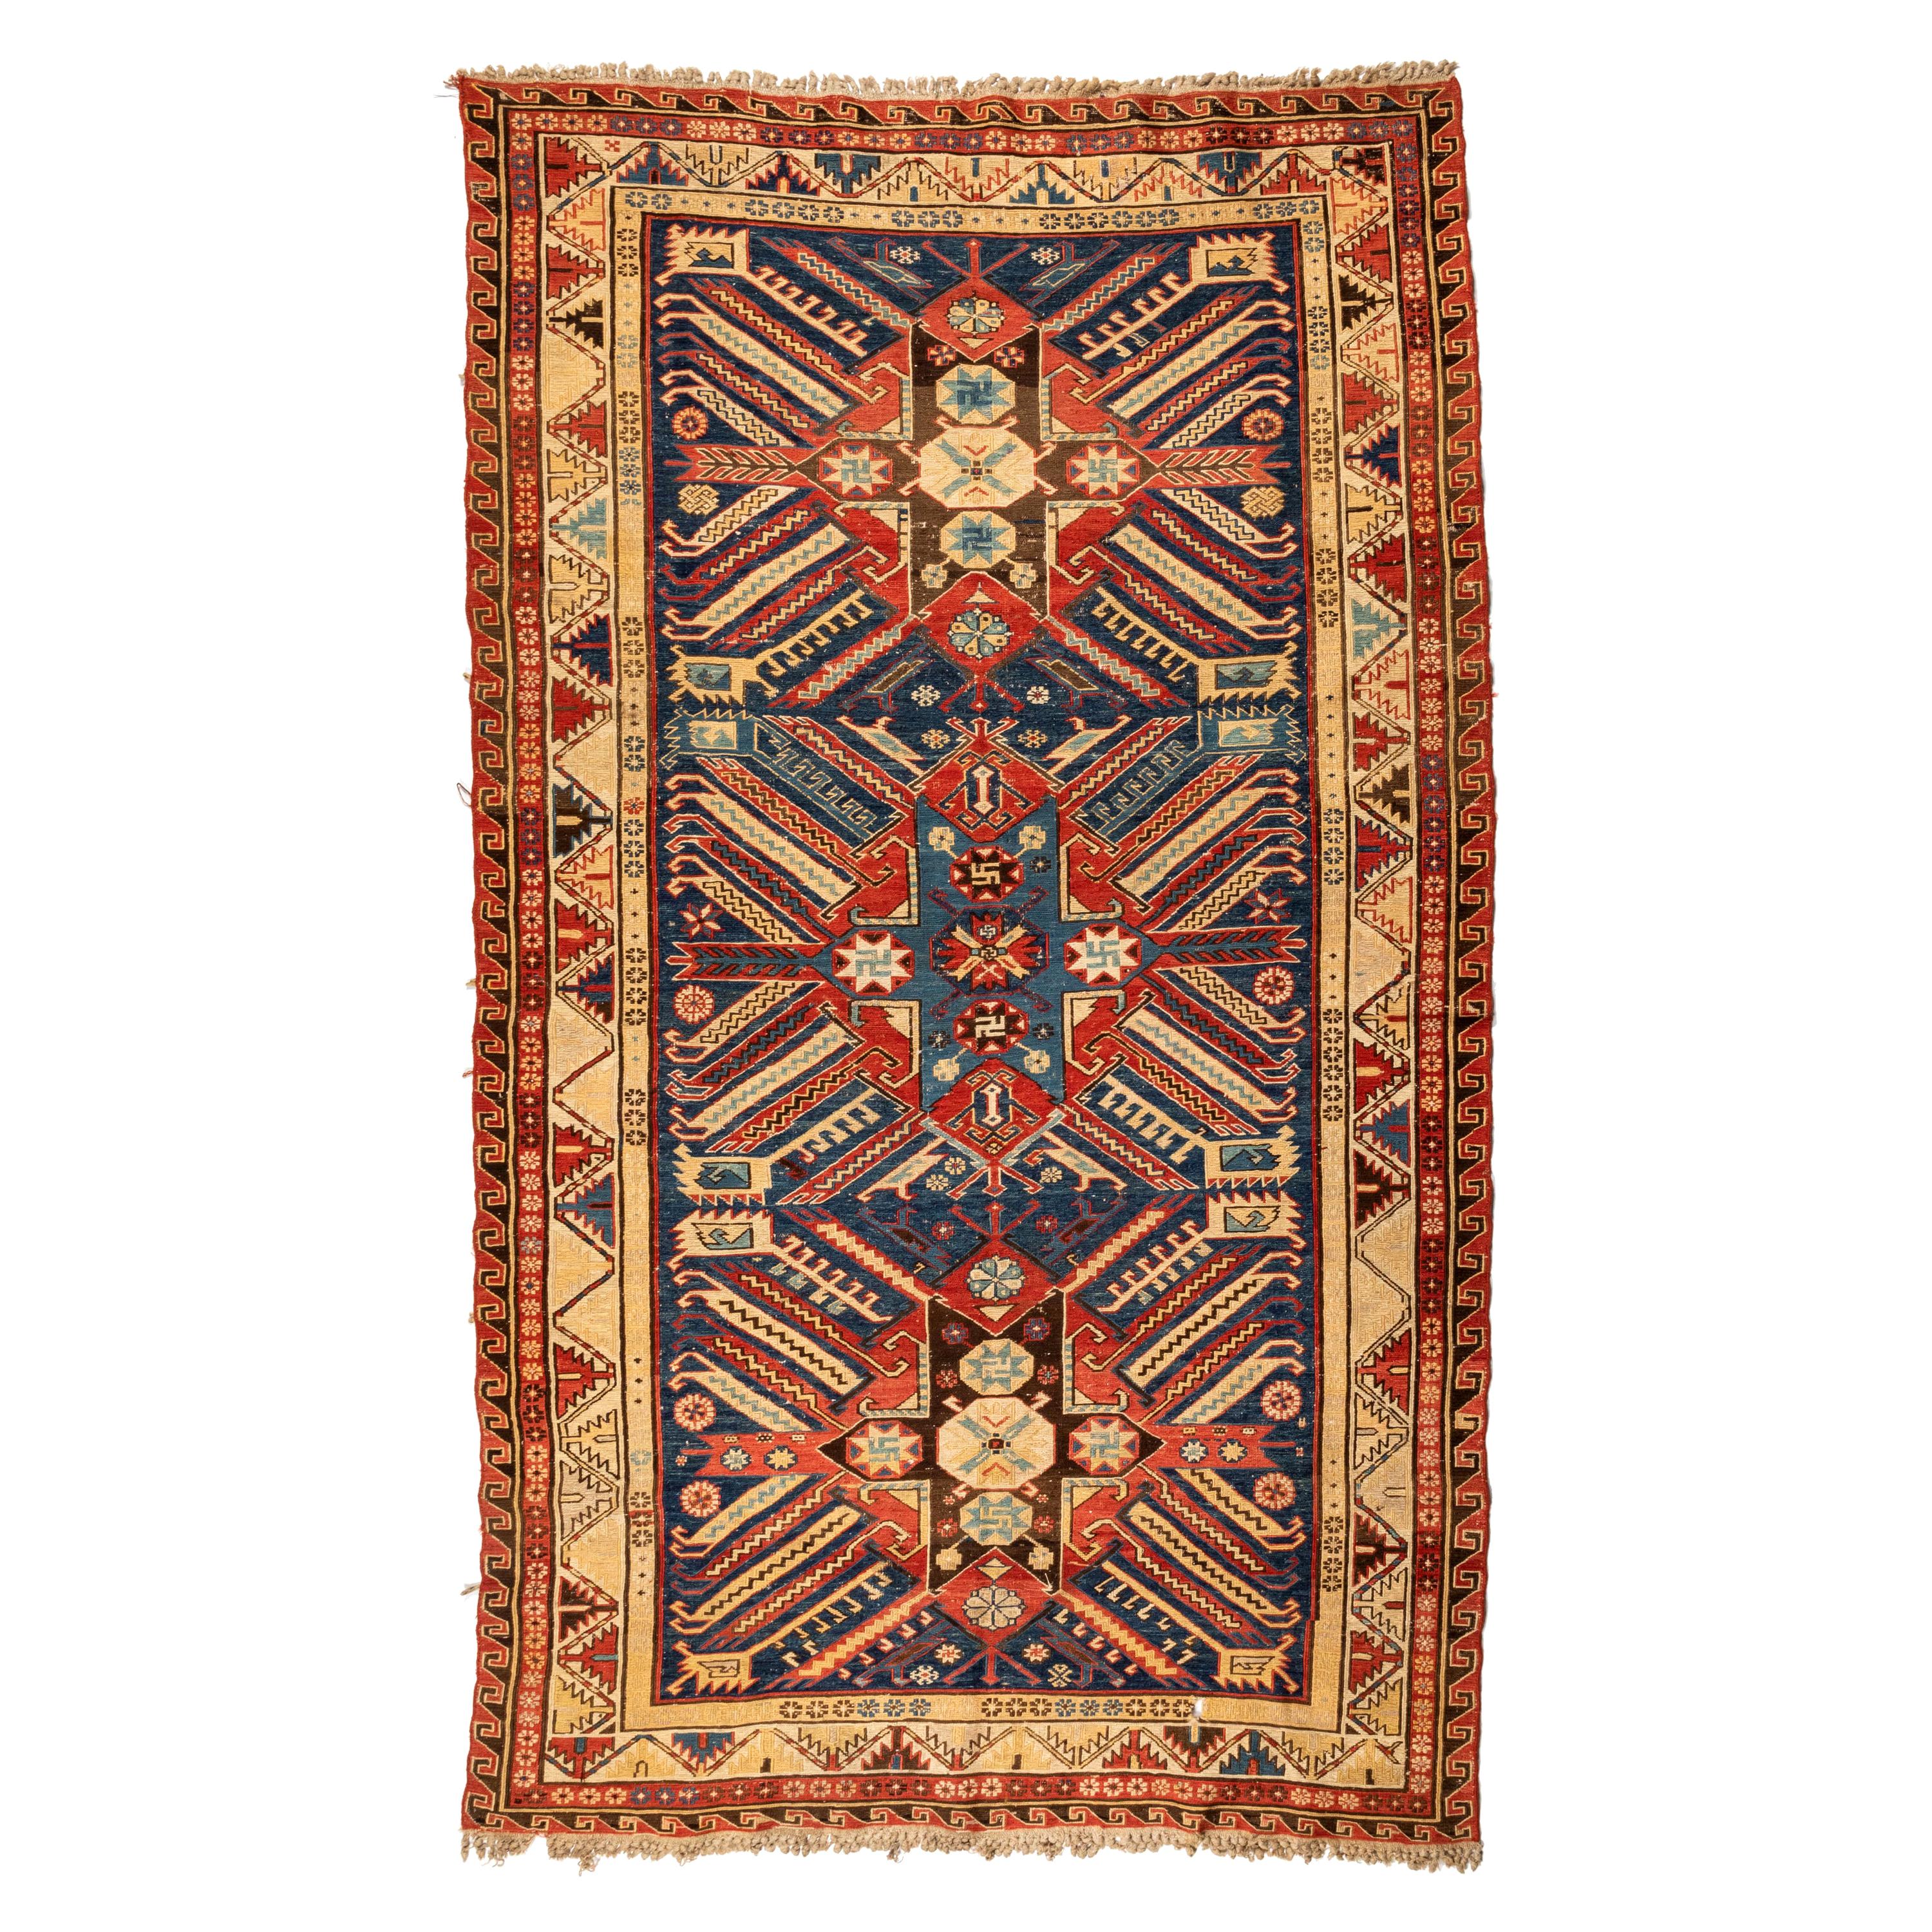 Late 19th C Antique Caucasian Red Blue Gold Tribal Soumak Rug For Sale